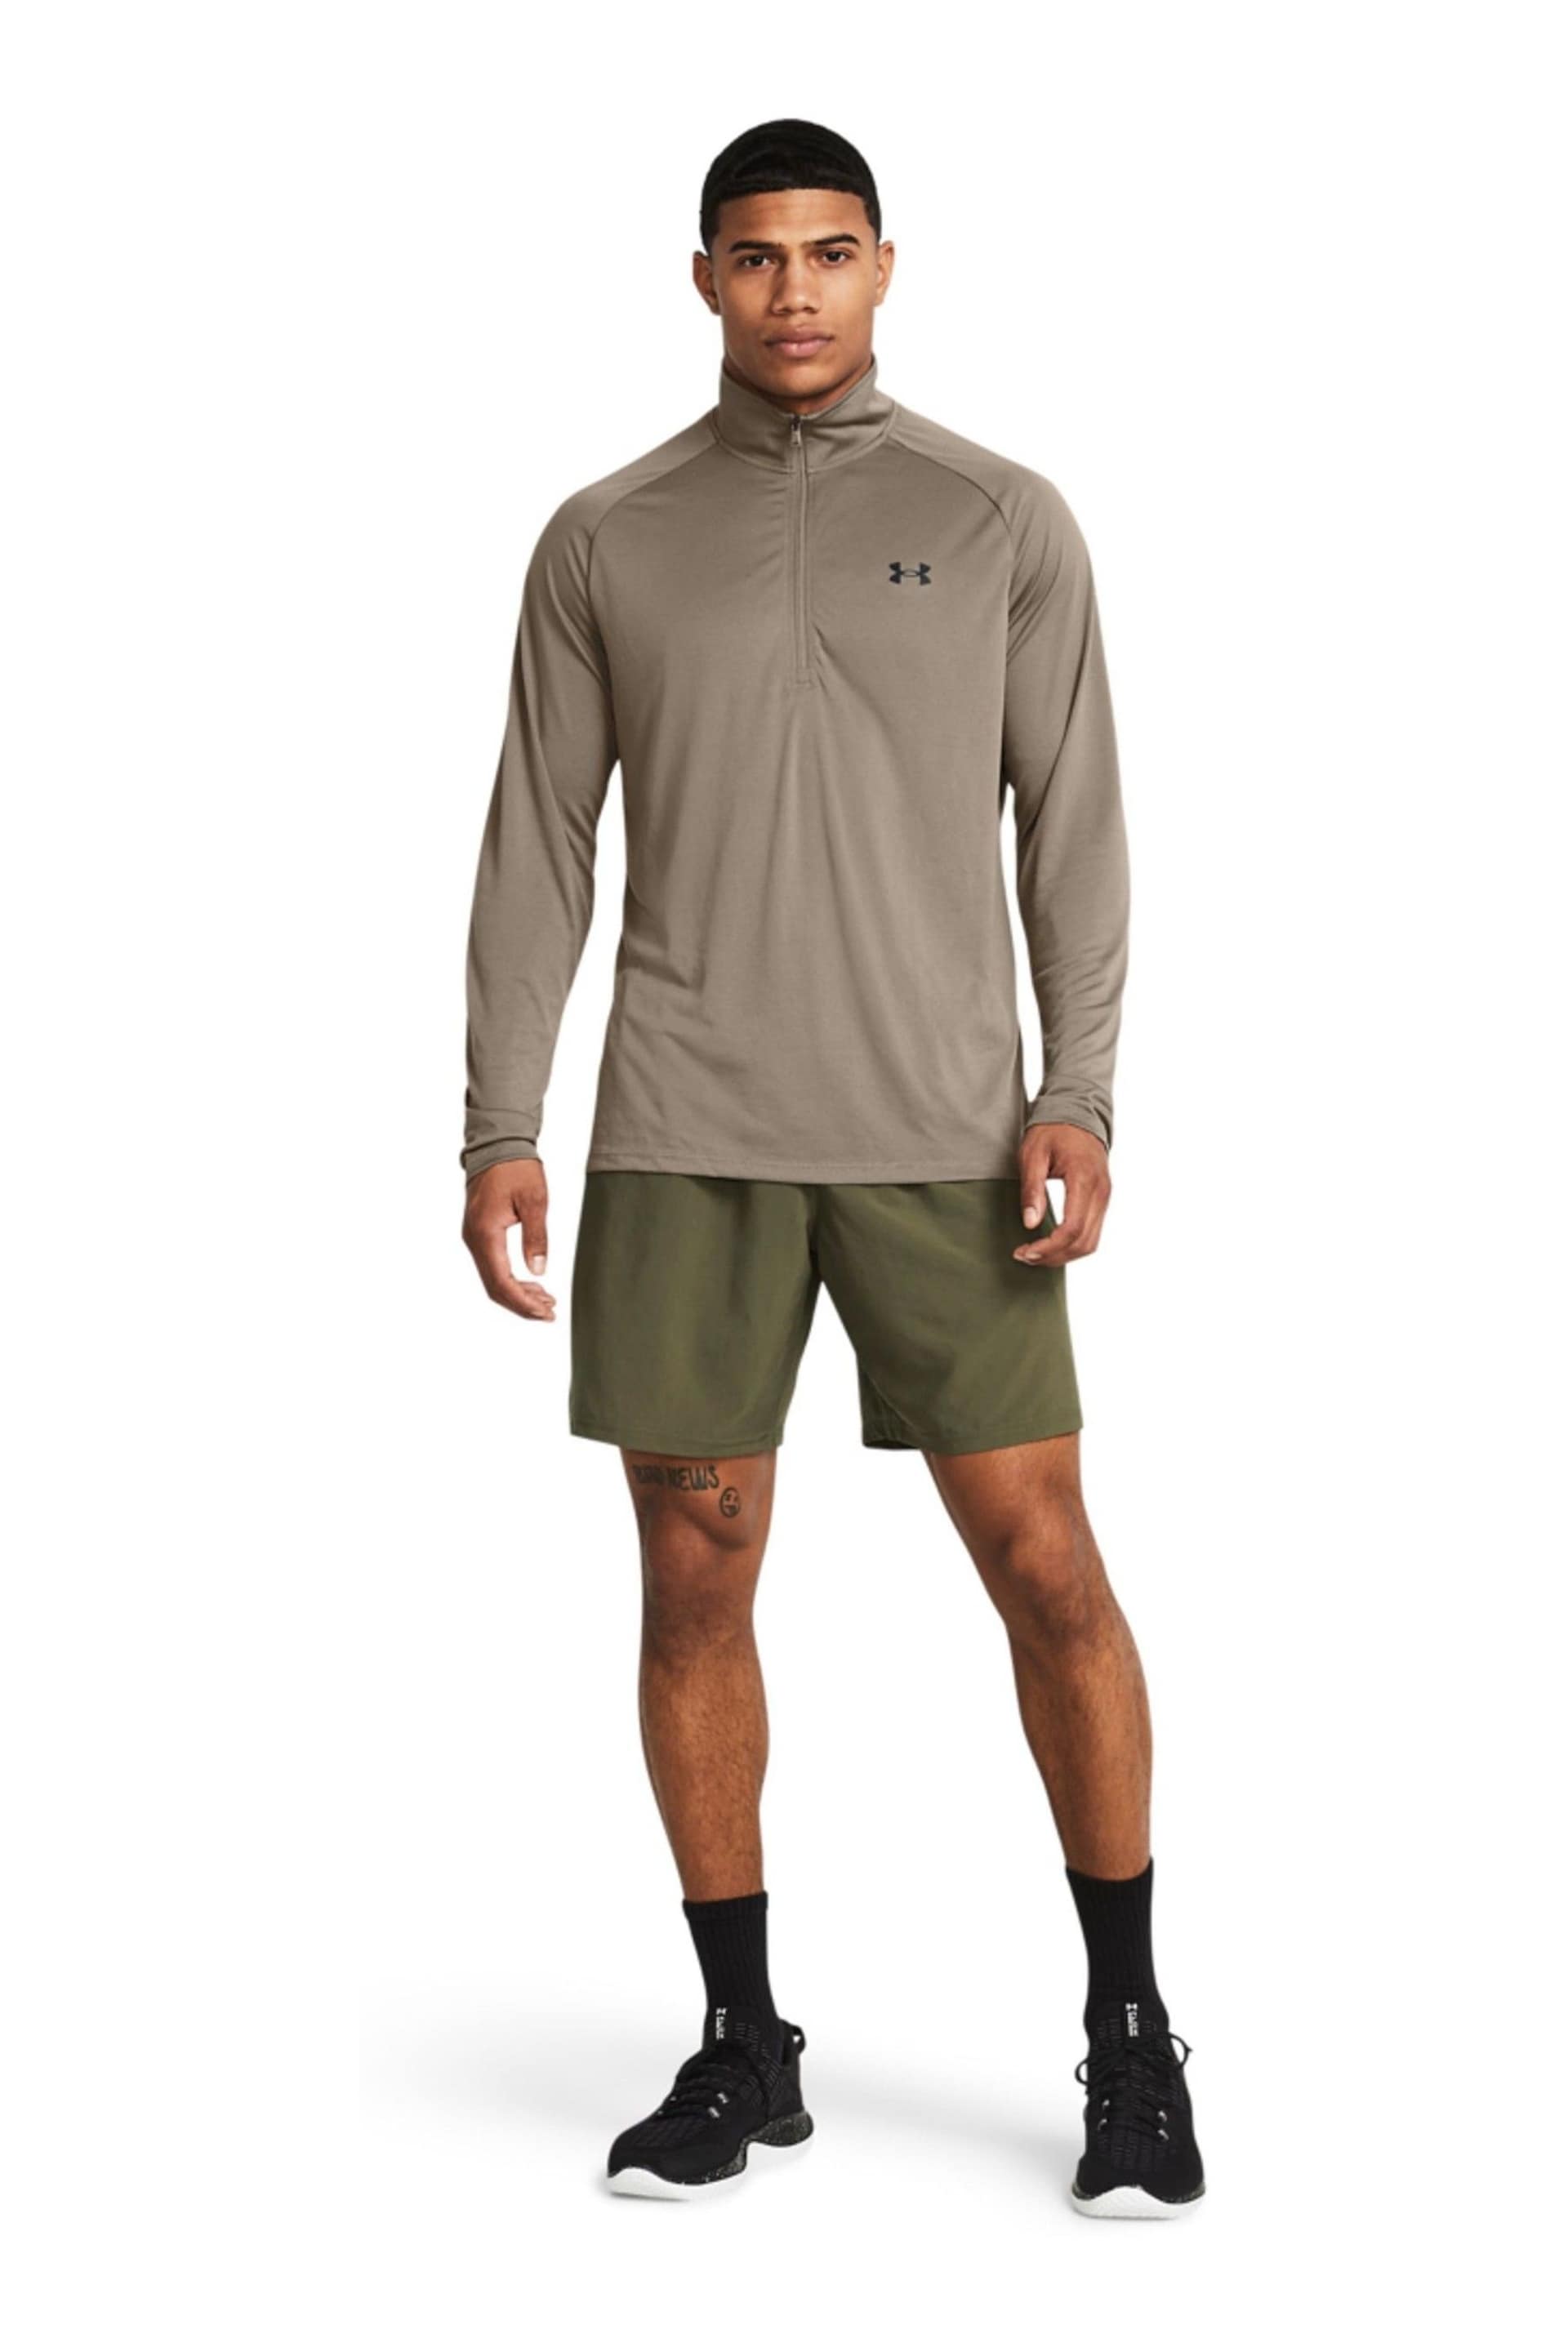 Under Armour Green Under Armour Green Woven Wordmark Shorts - Image 3 of 4